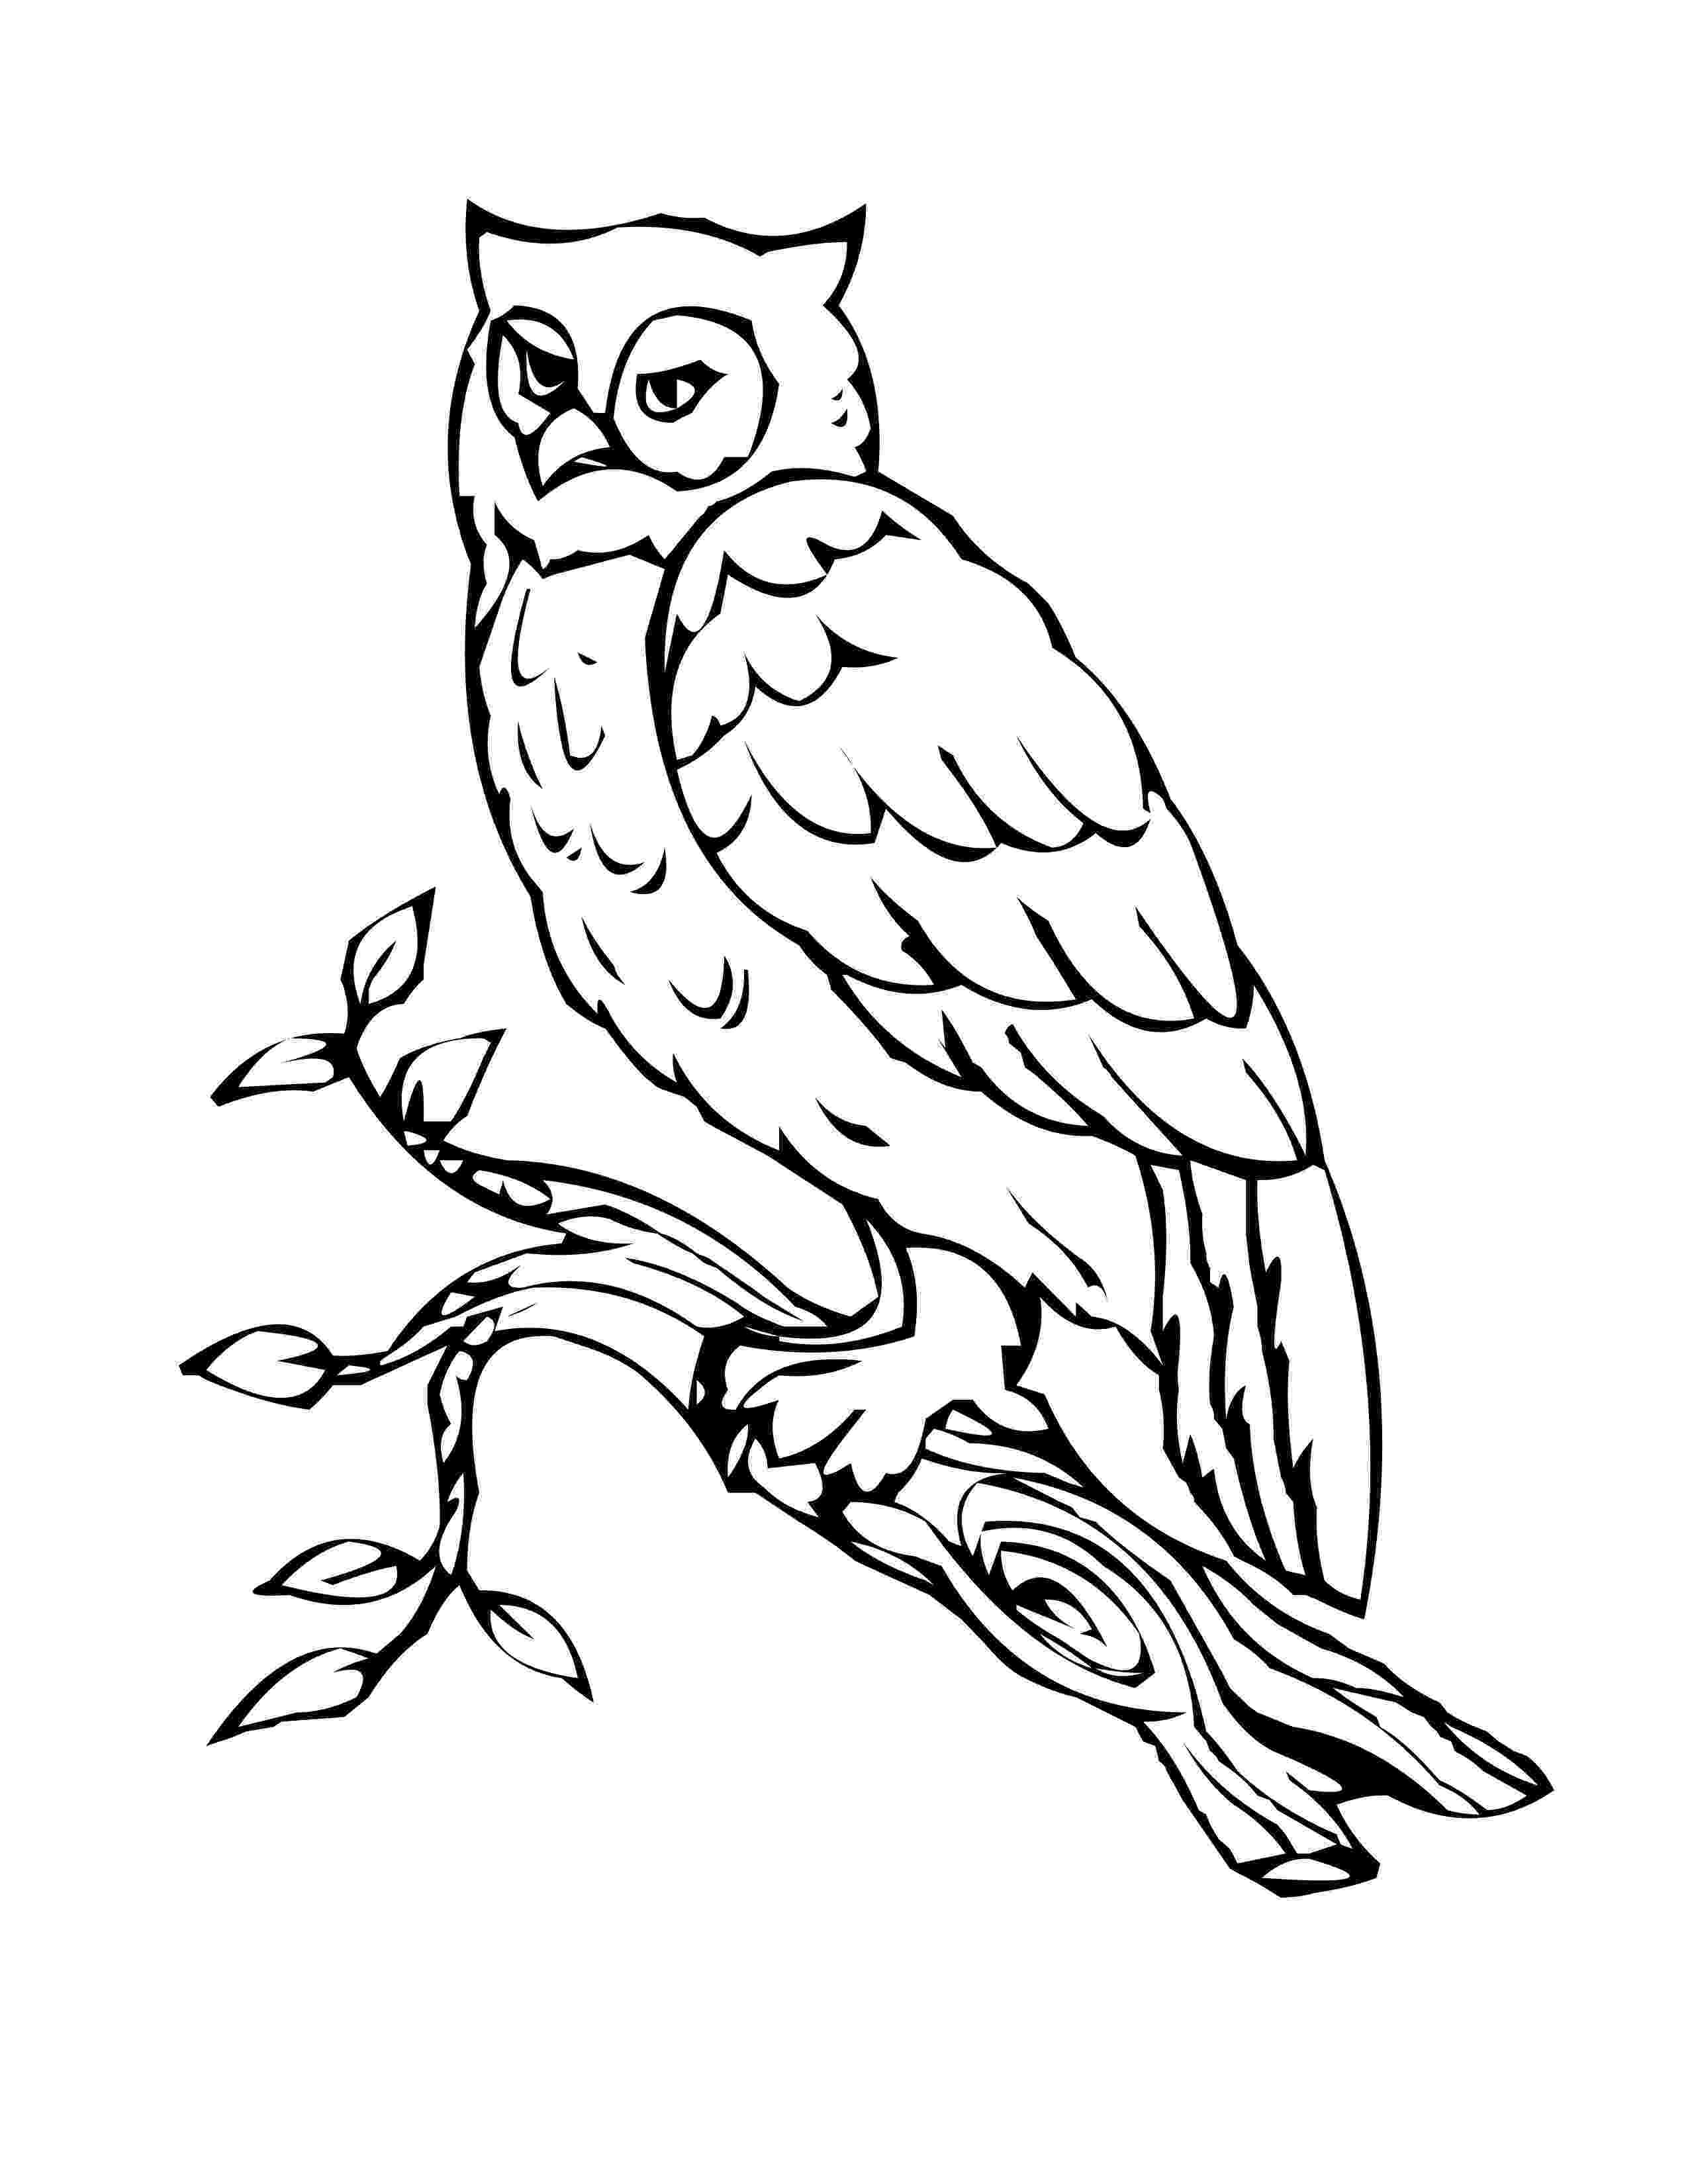 printable owl images cartoon owl coloring page free printable coloring pages images printable owl 